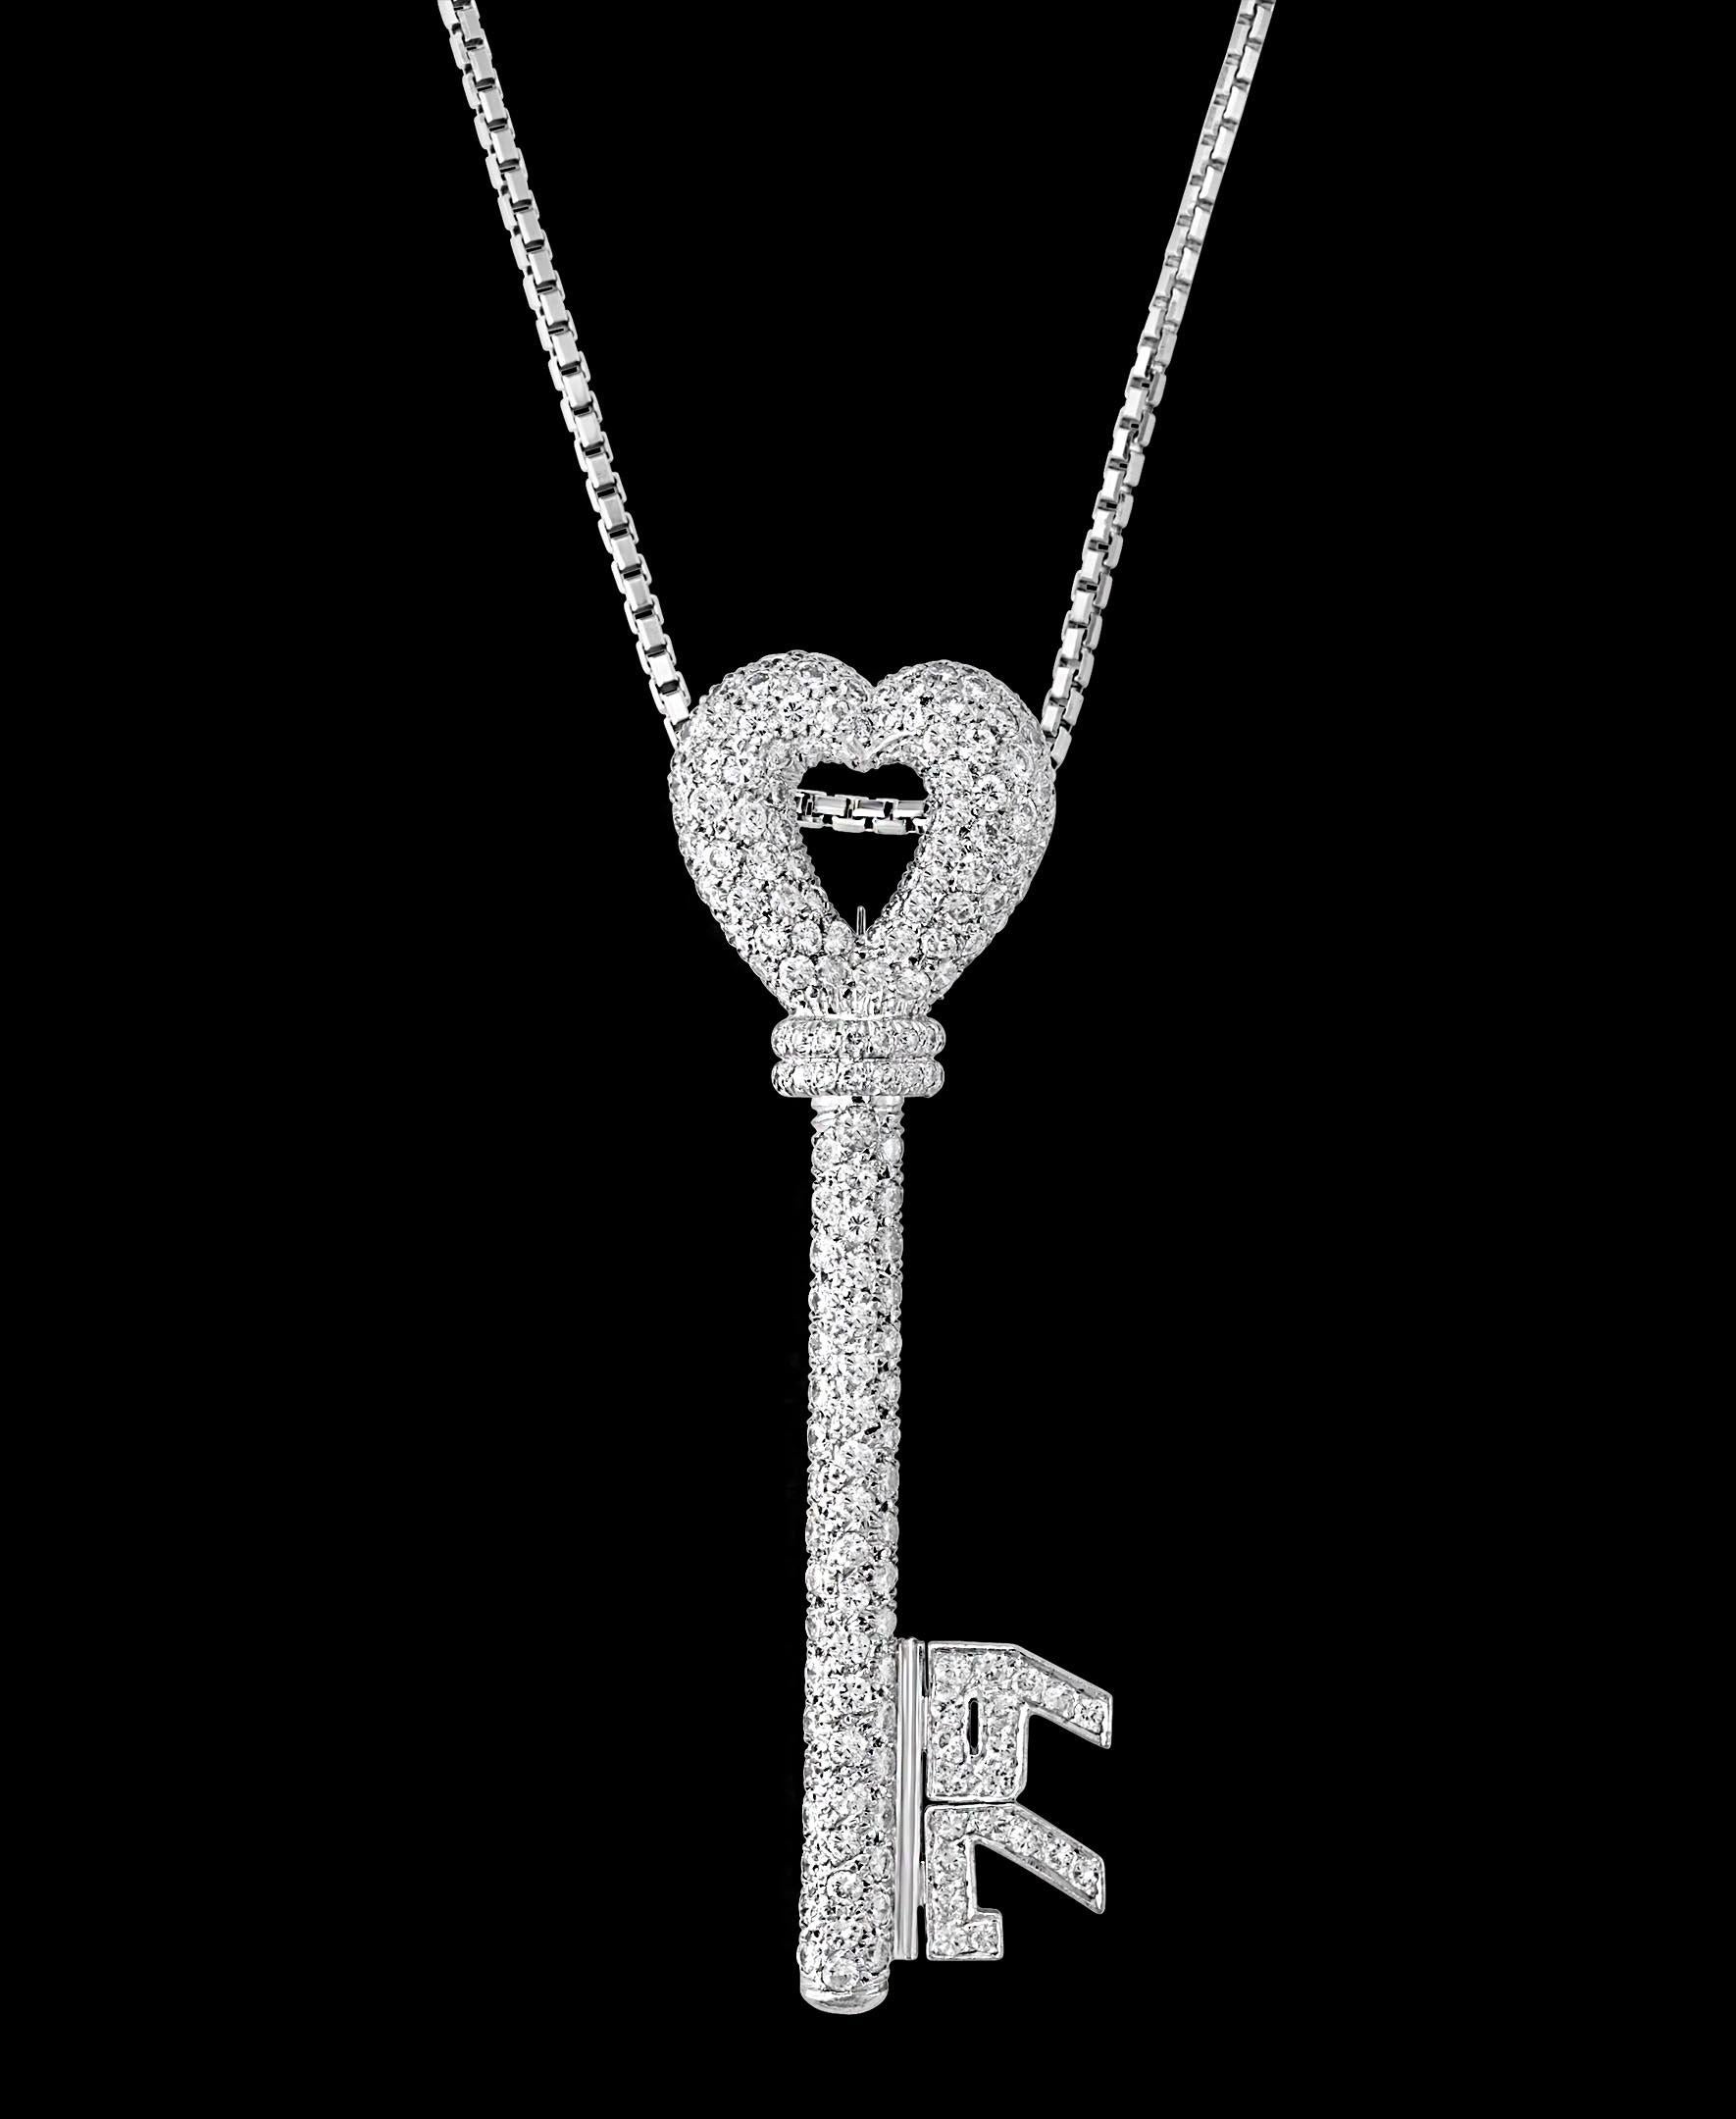 10 Carats Diamonds Key Necklace / Pin 18 Karat White Gold  Designer Balestra
Amazing Key Necklace with 10 Carat brilliant round diamonds ,
It comes with a heavy 18 Karat white gold chain
This key can be used as a pin too.
79 digits are filled with